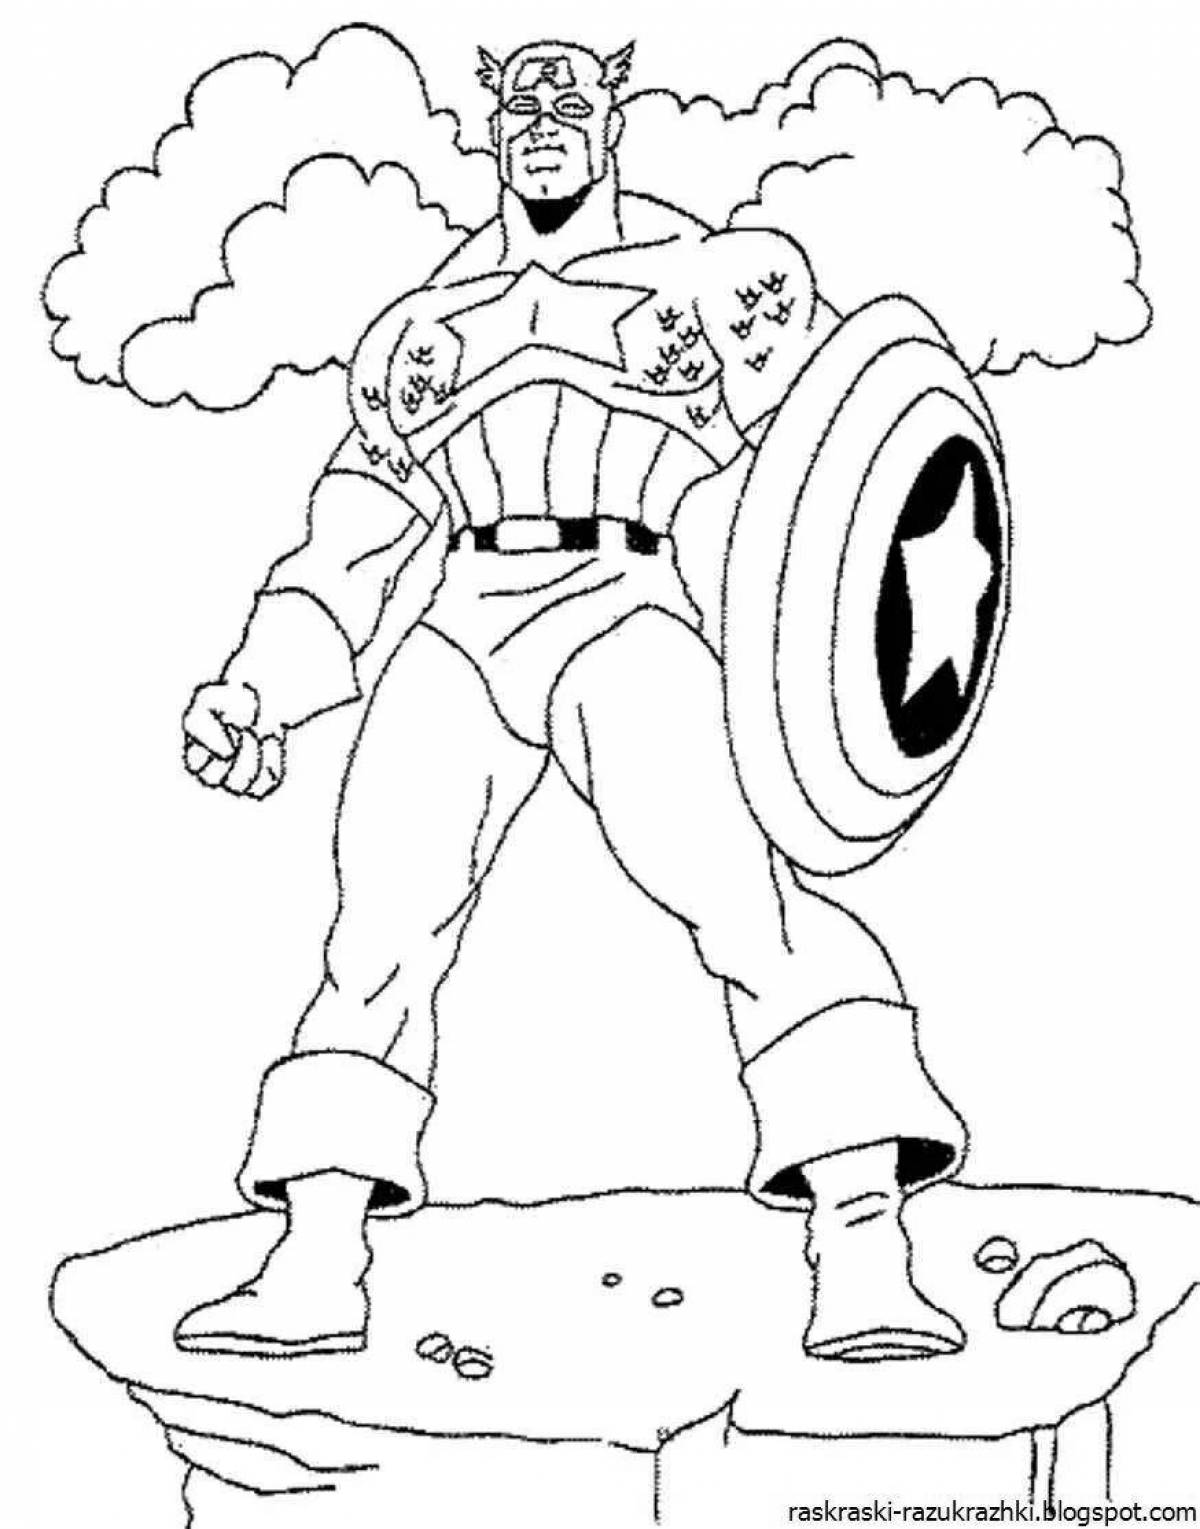 Incredible superhero coloring pages for 6-7 year olds